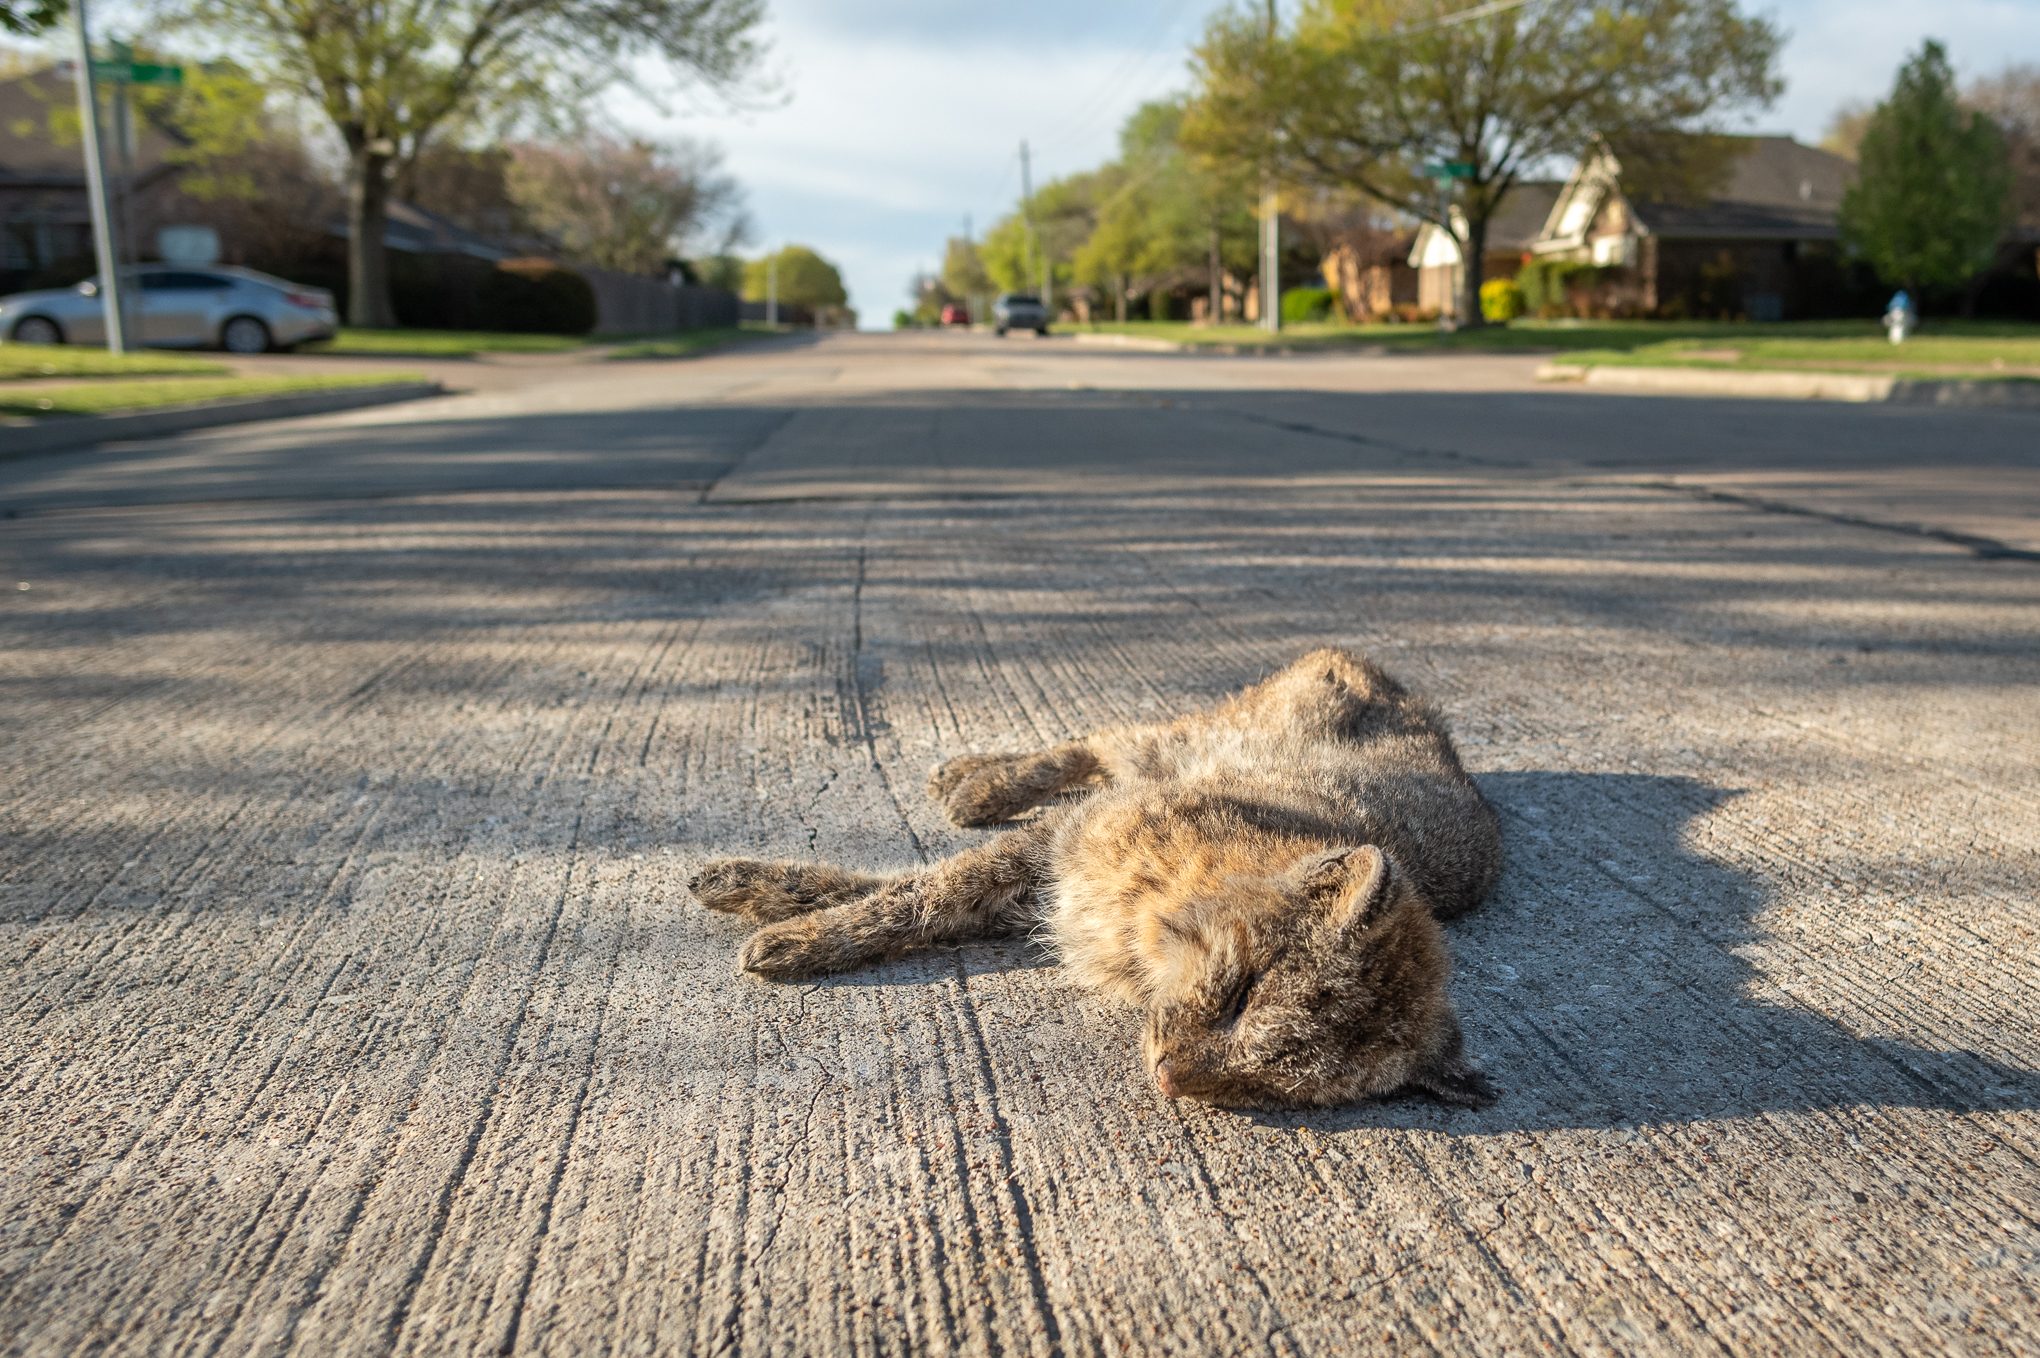 A bobcat dead on the road.